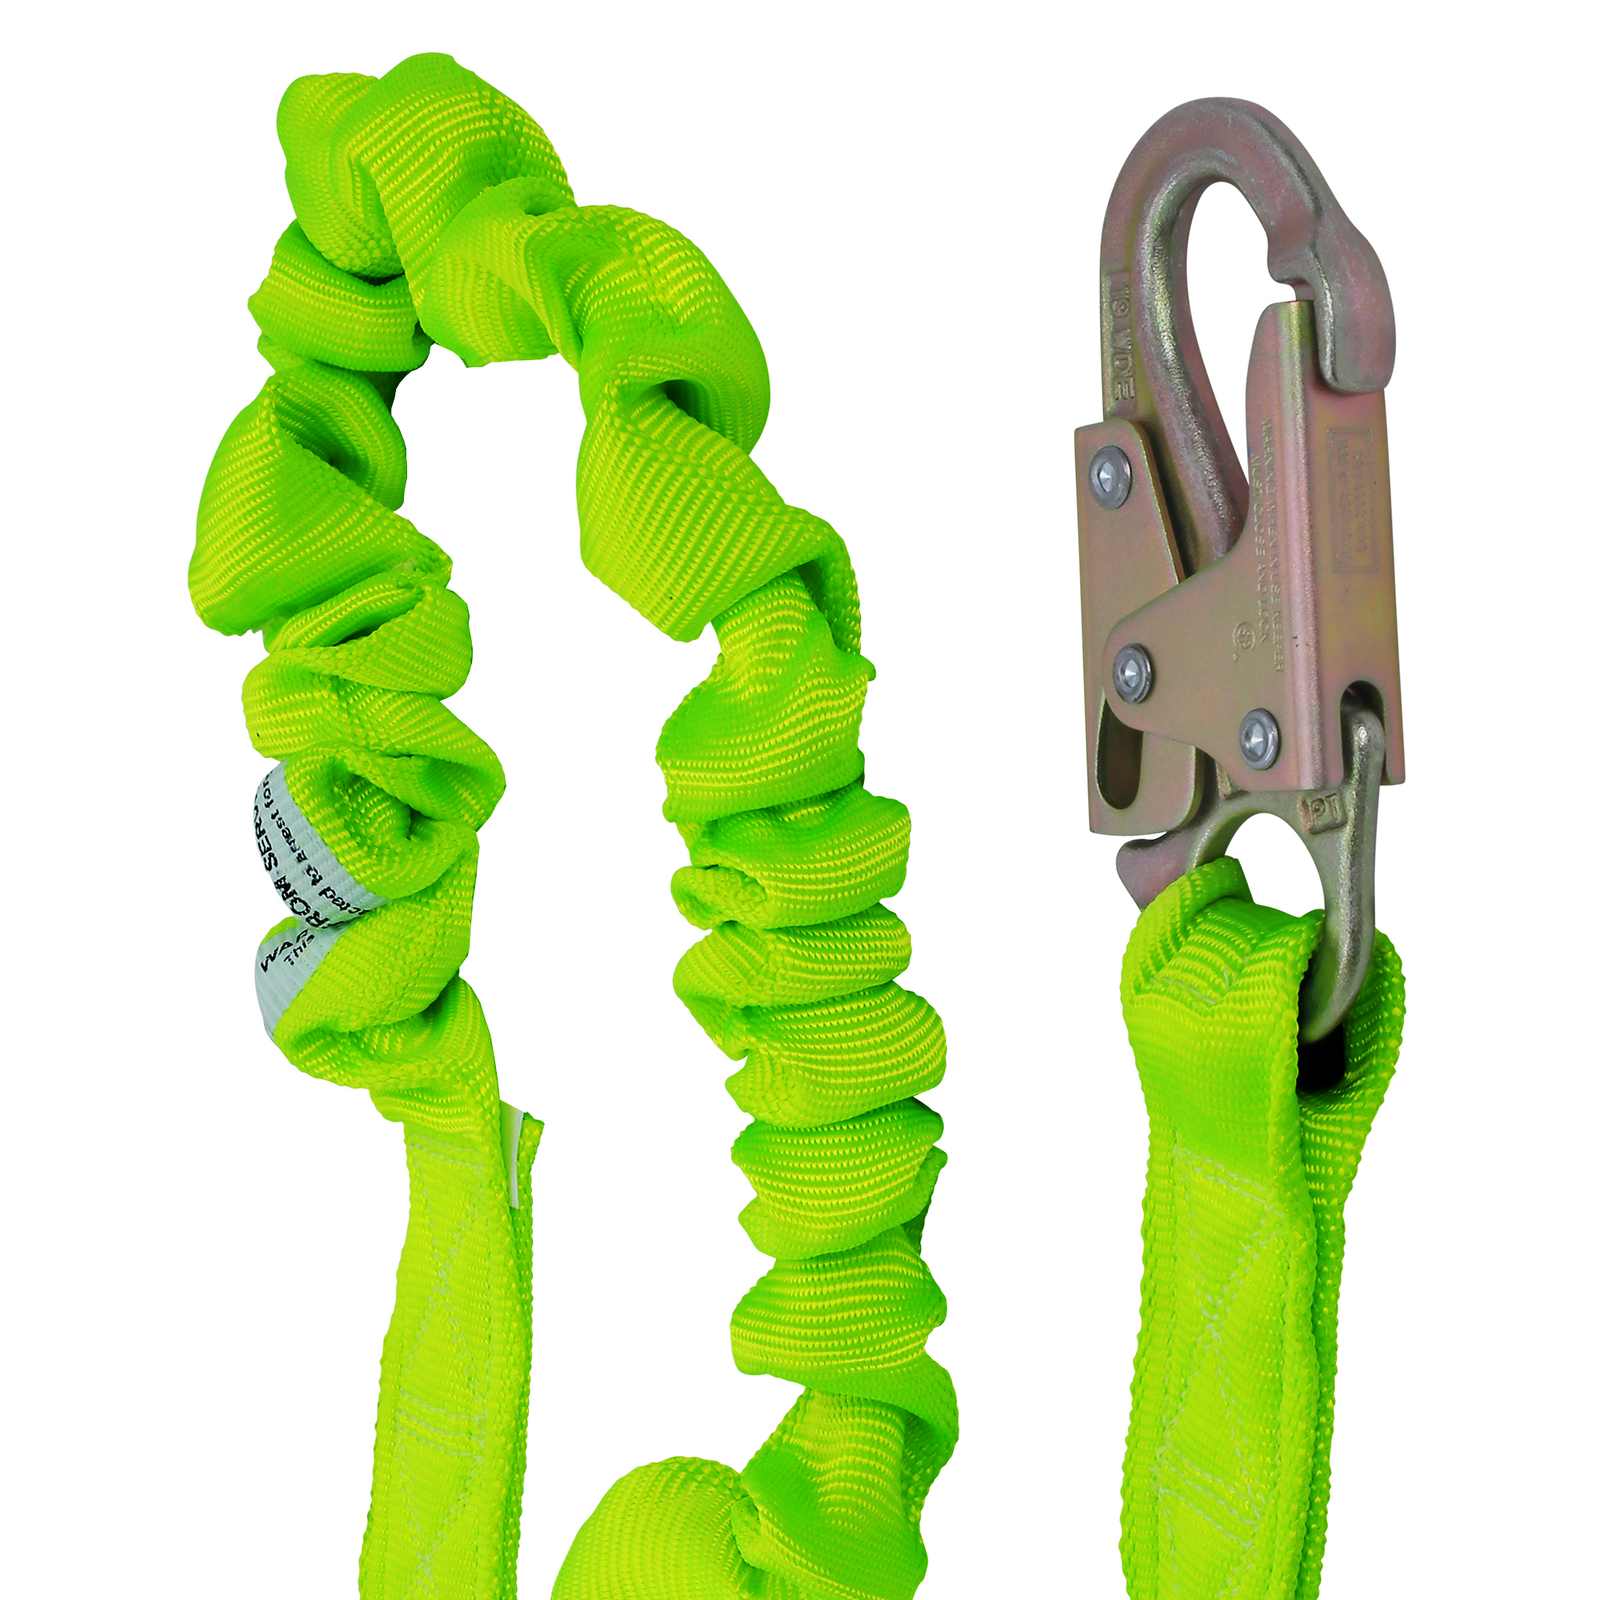 Close up the show one of the metal snap hooks on the Shock absorbing JORESTECH lime lanyard